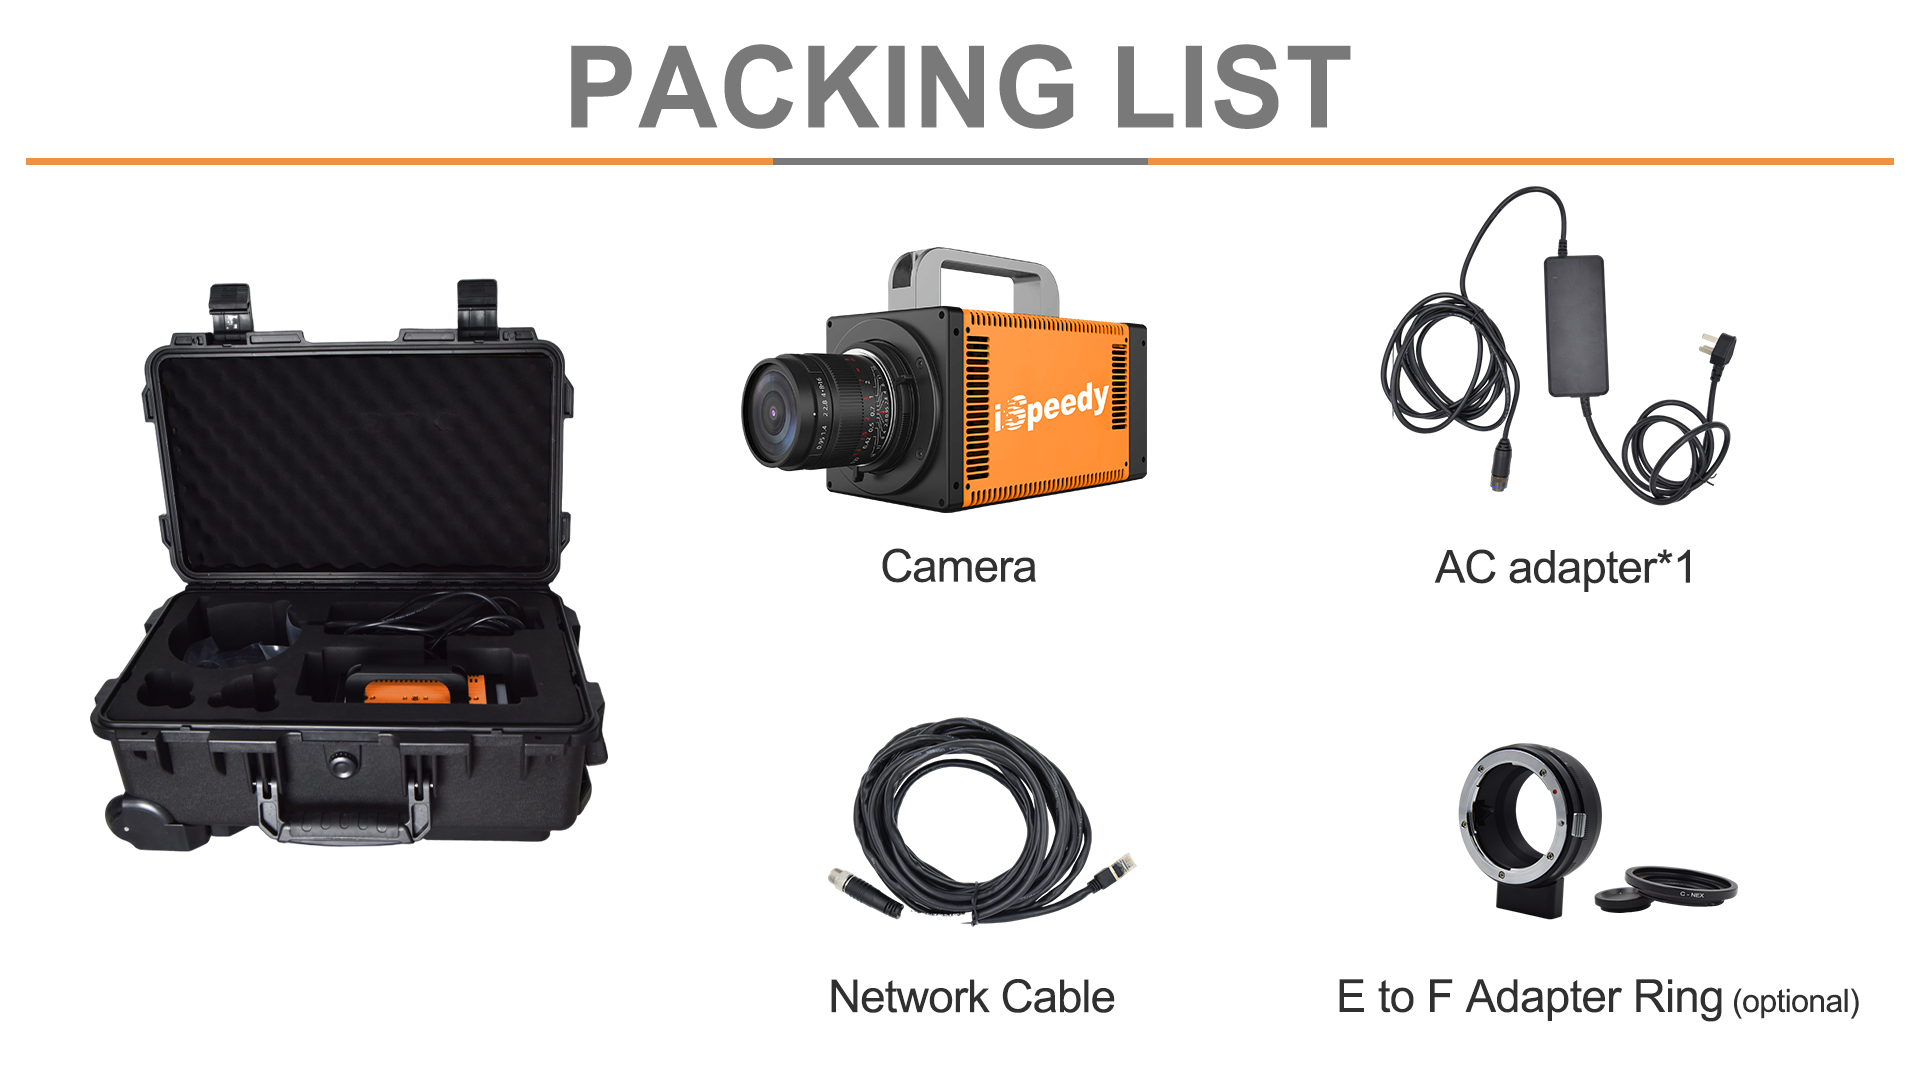 705000FPS high speed camera packing list